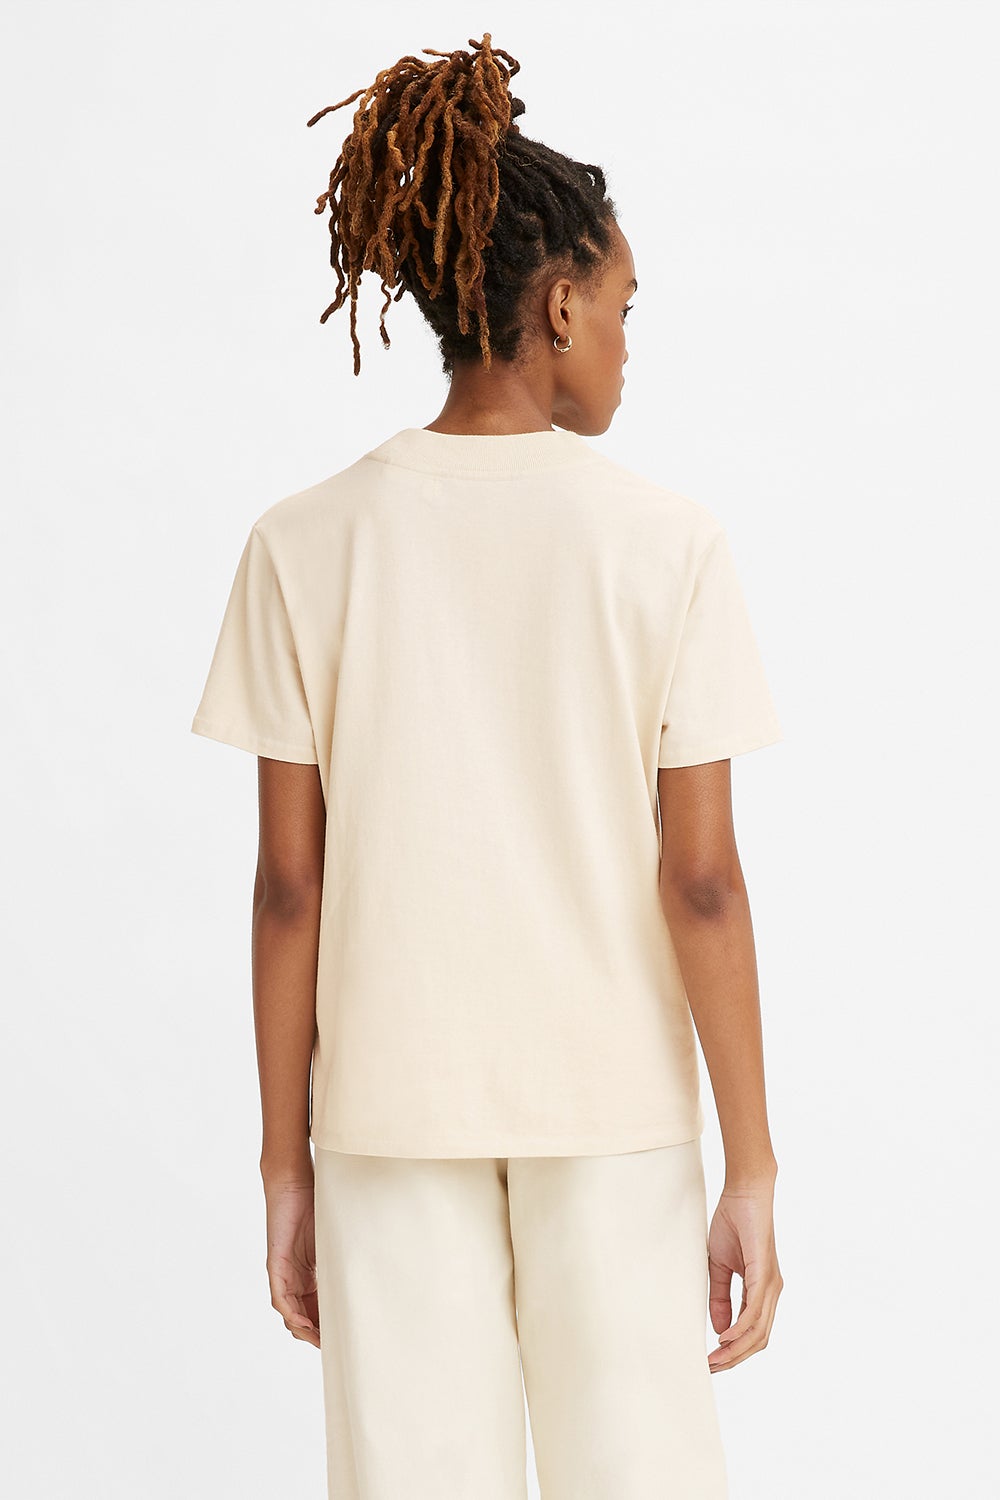 Levi's Made and Crafted Mock Neck Tee Oatmeal